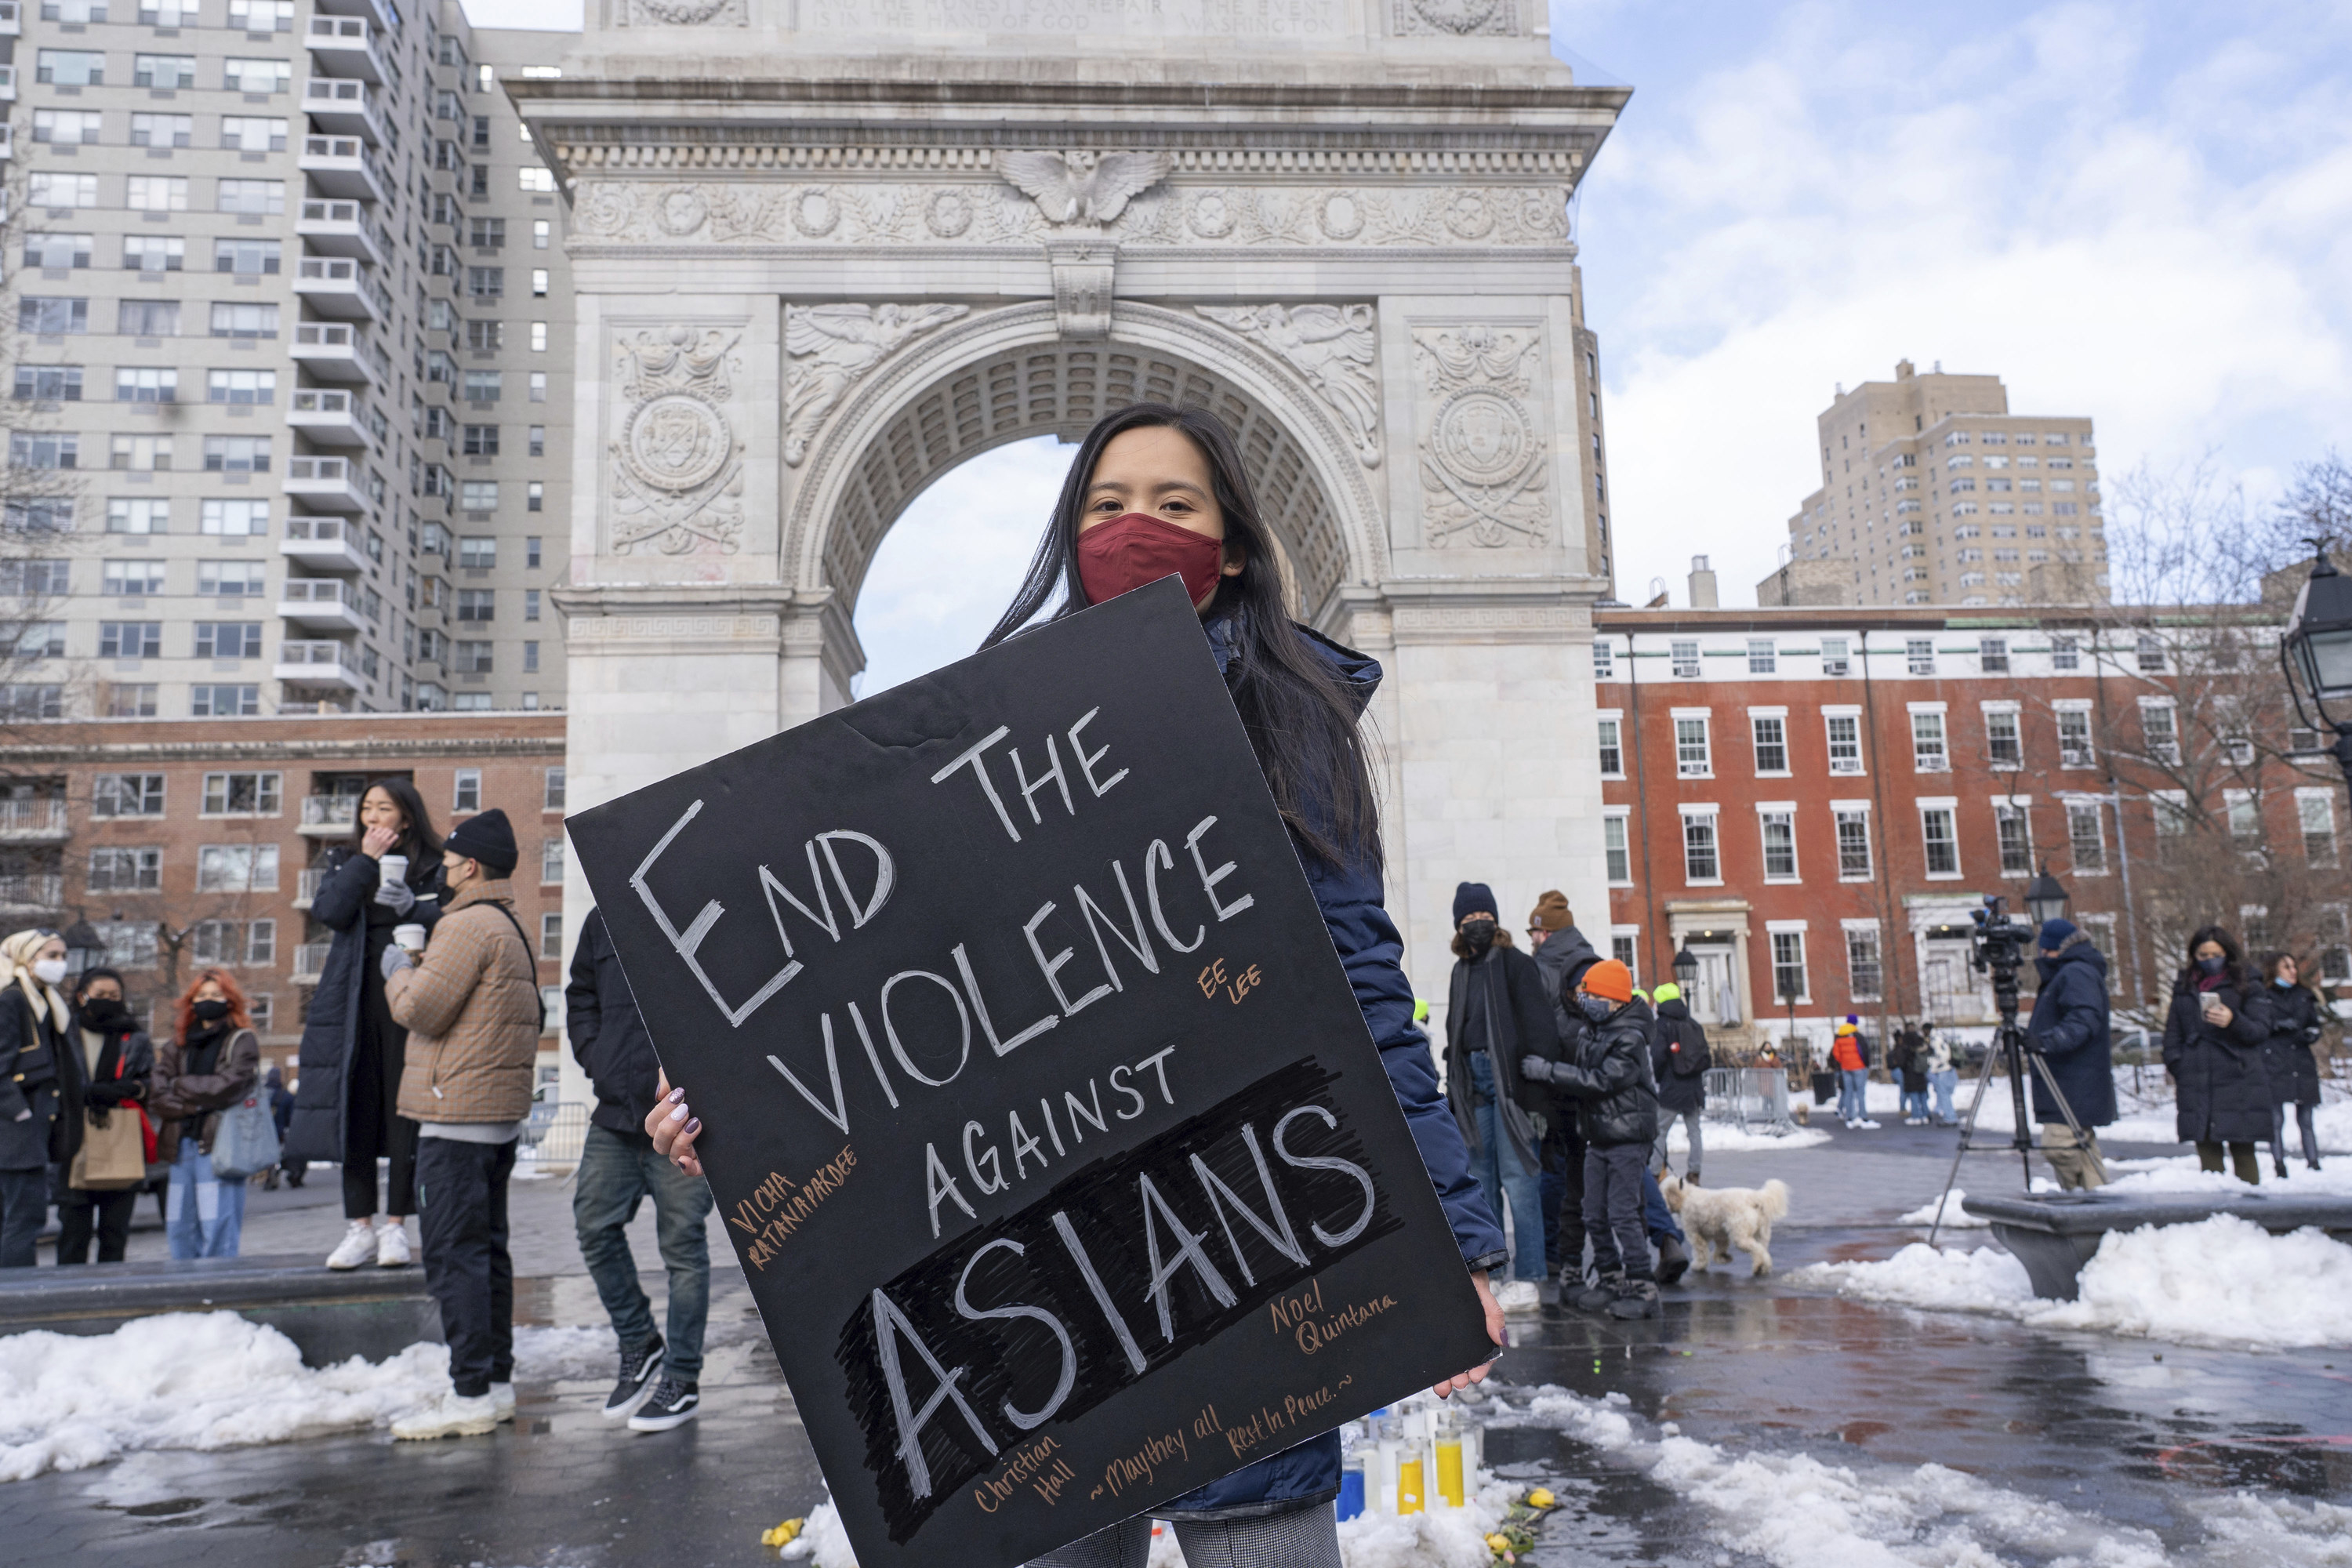 A protester holds a placard that reads &quot;end the violence against Asians&quot; in front of the Washington Square Arch surrounded by snow on the ground